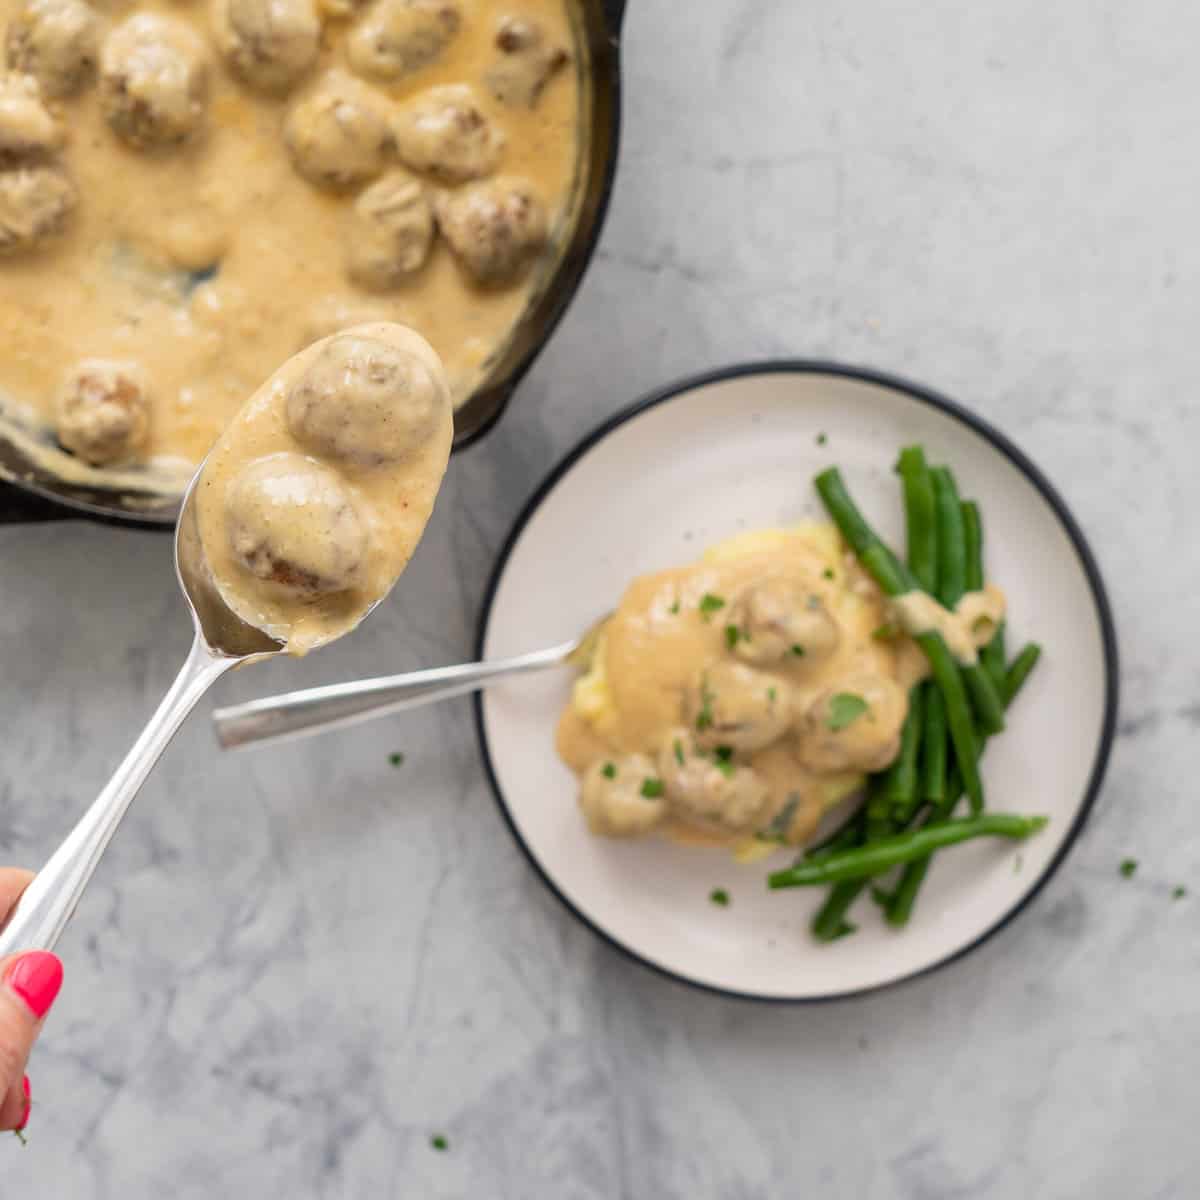 A spoonful of Sweedish meatballs raised above the rest of the batch below in a cast-iron pan next a plate with a serving over the top of mashed potatoes and side of blanched beans and a sprinkling of parsley.